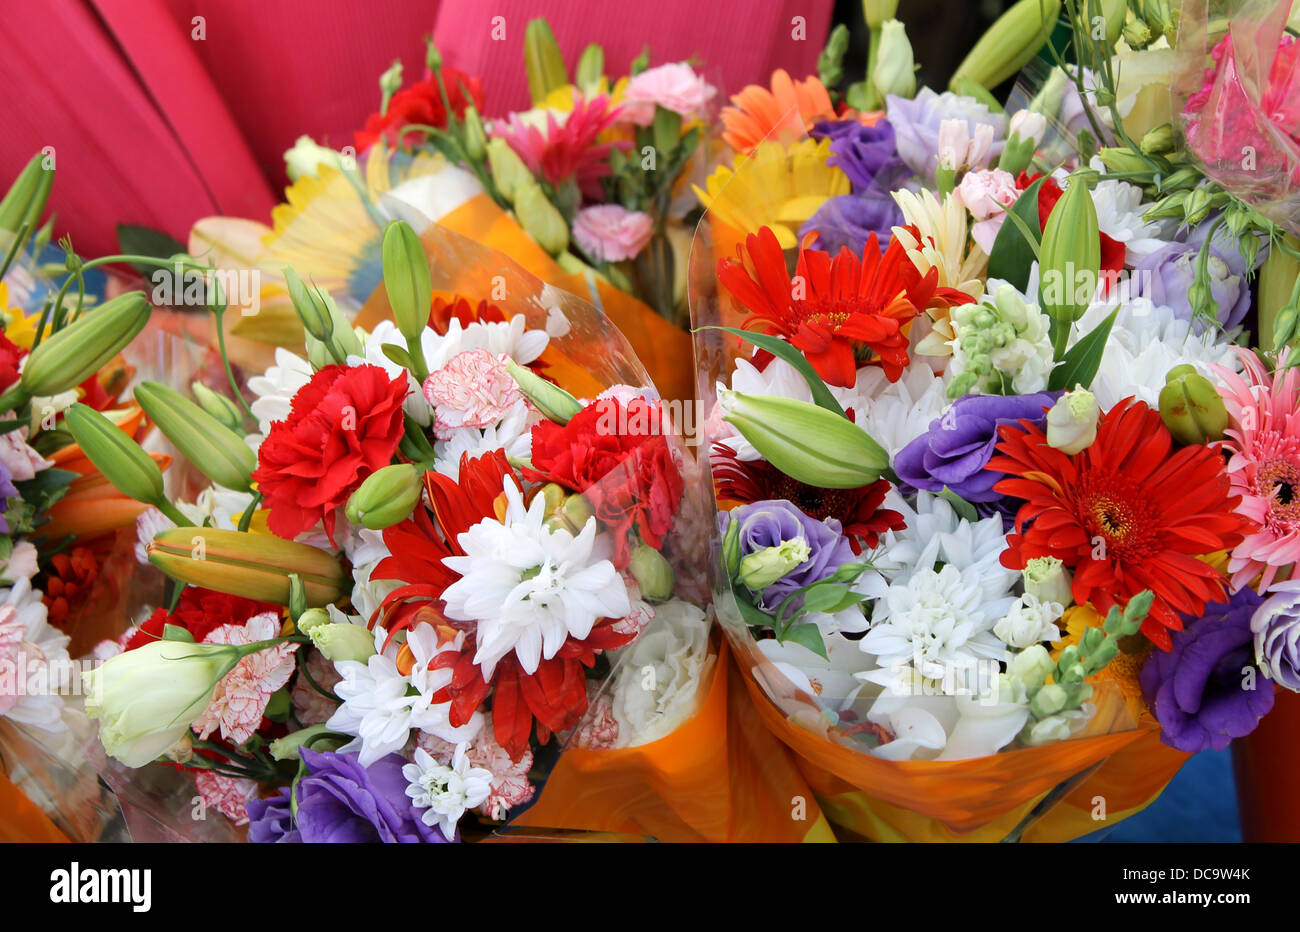 Bouquets of colorful flowers on market stall. Stock Photo